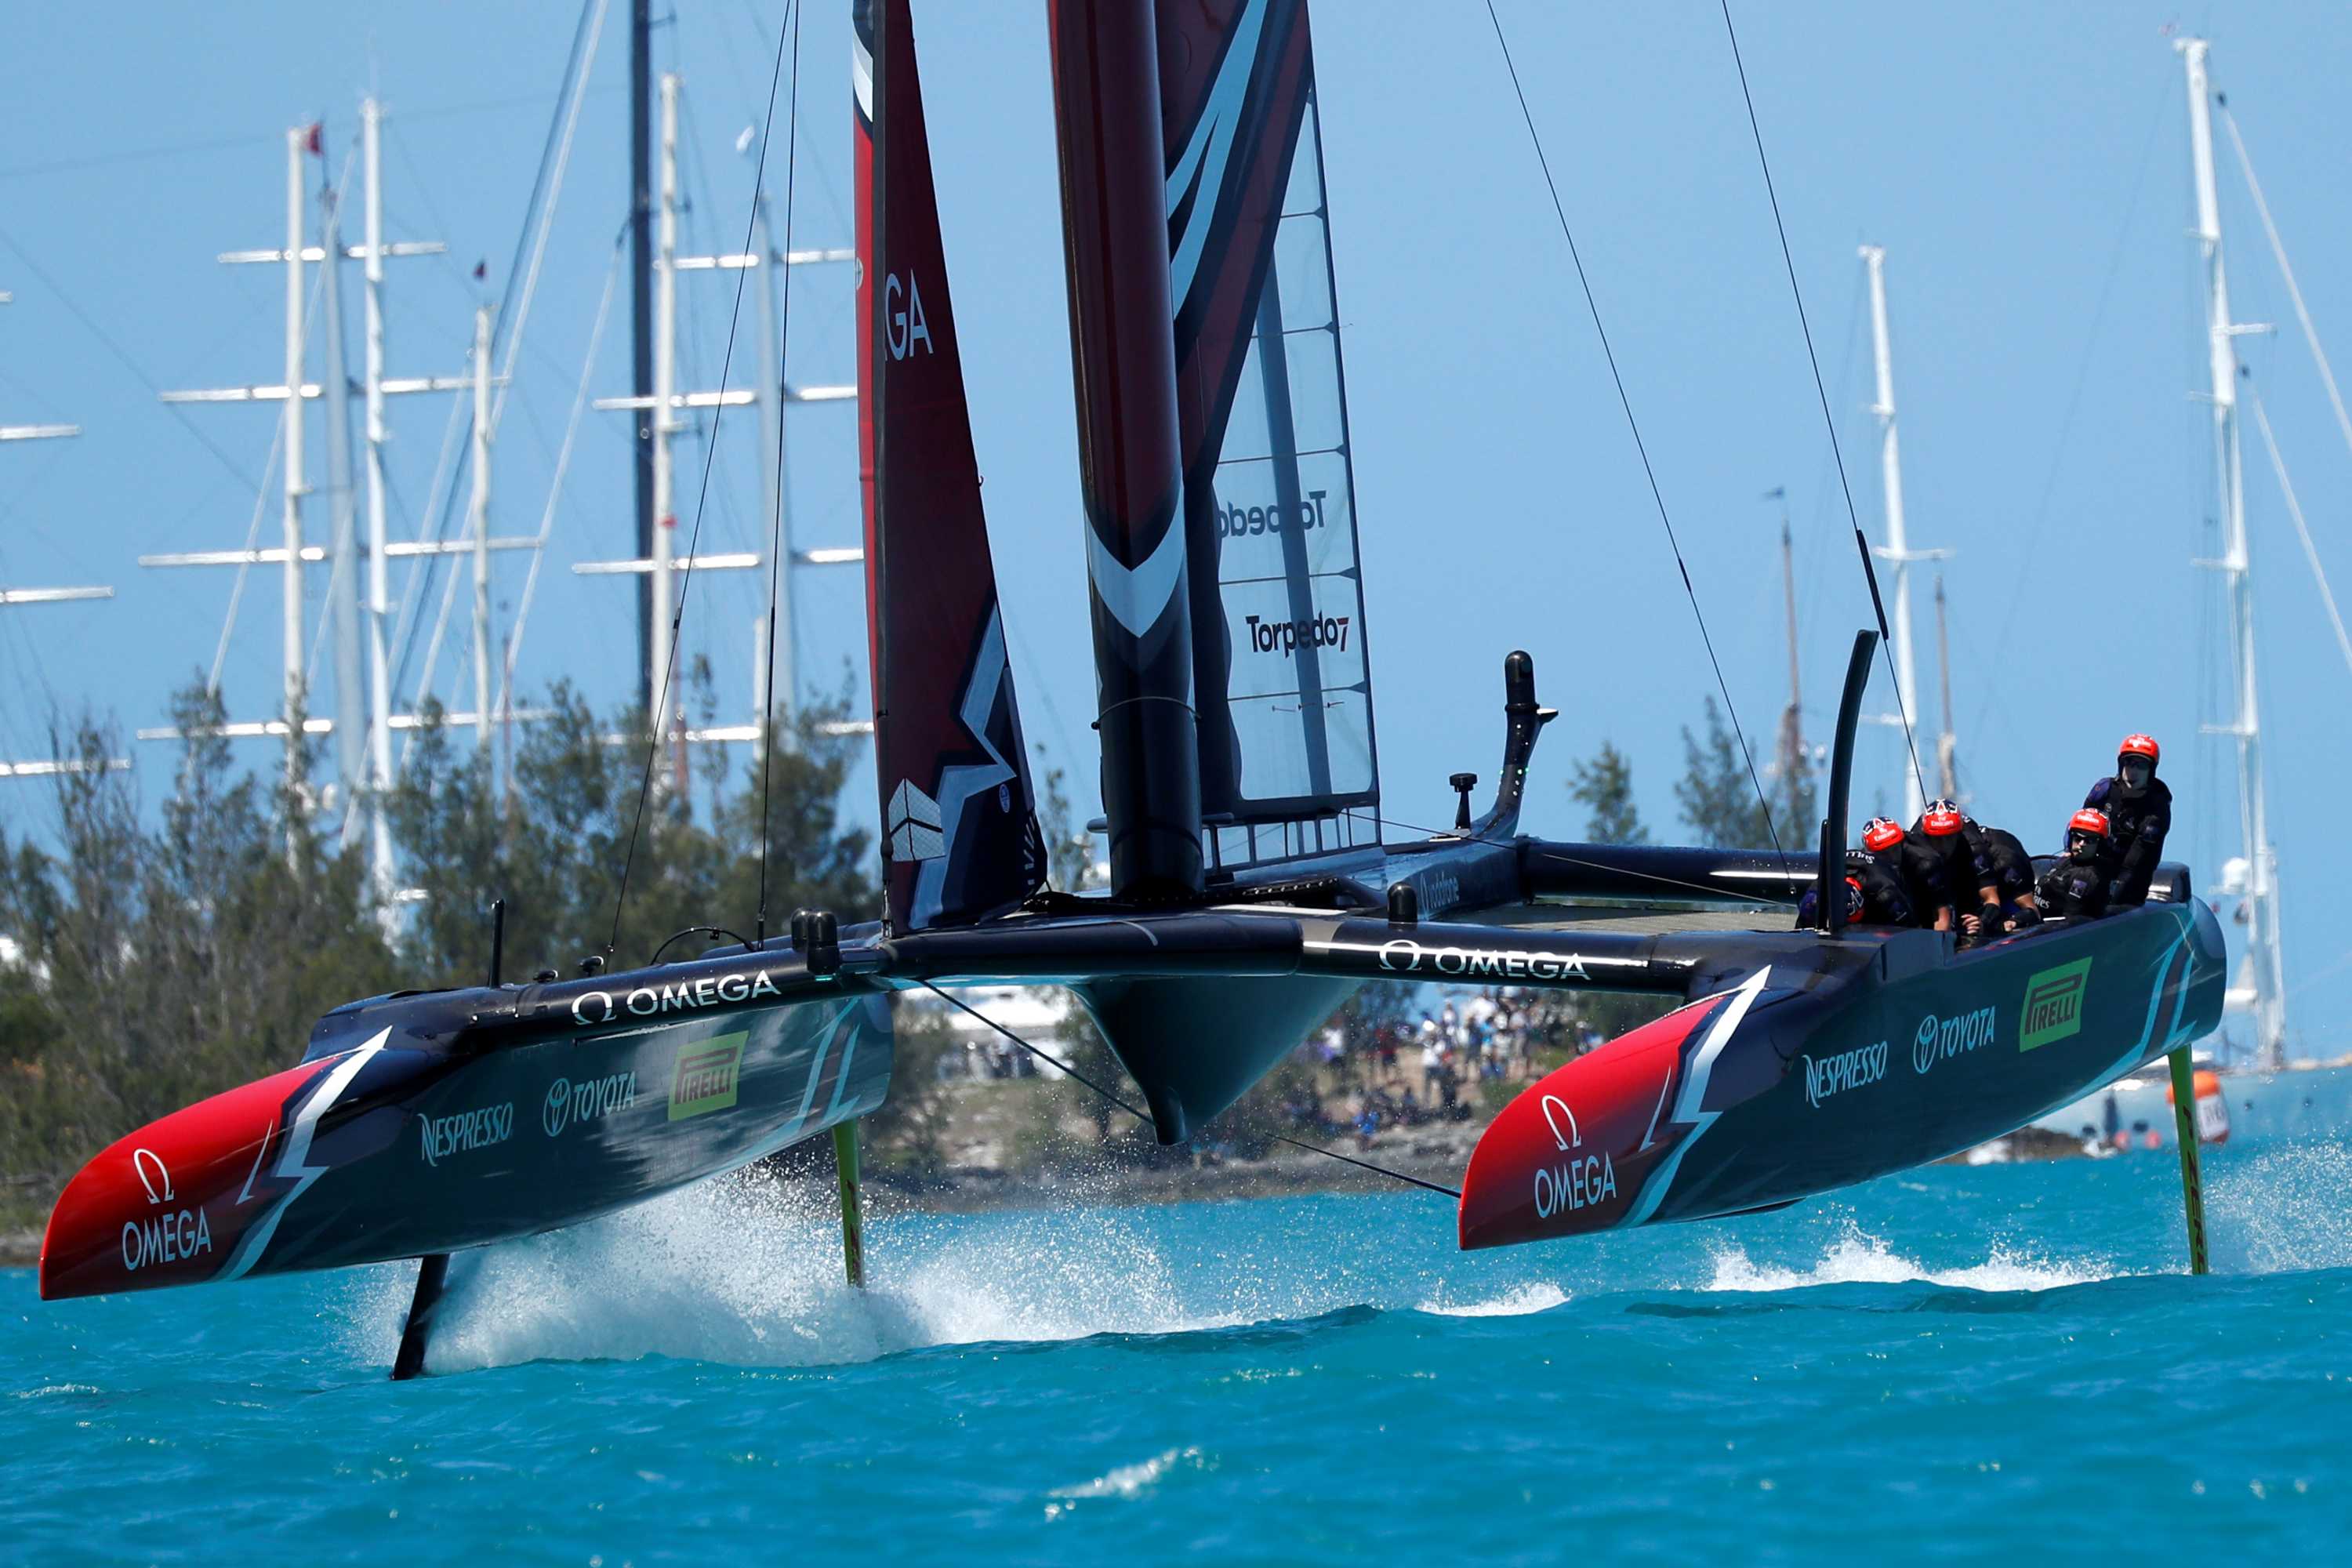 6 famous America's Cup yachts - where are they now?